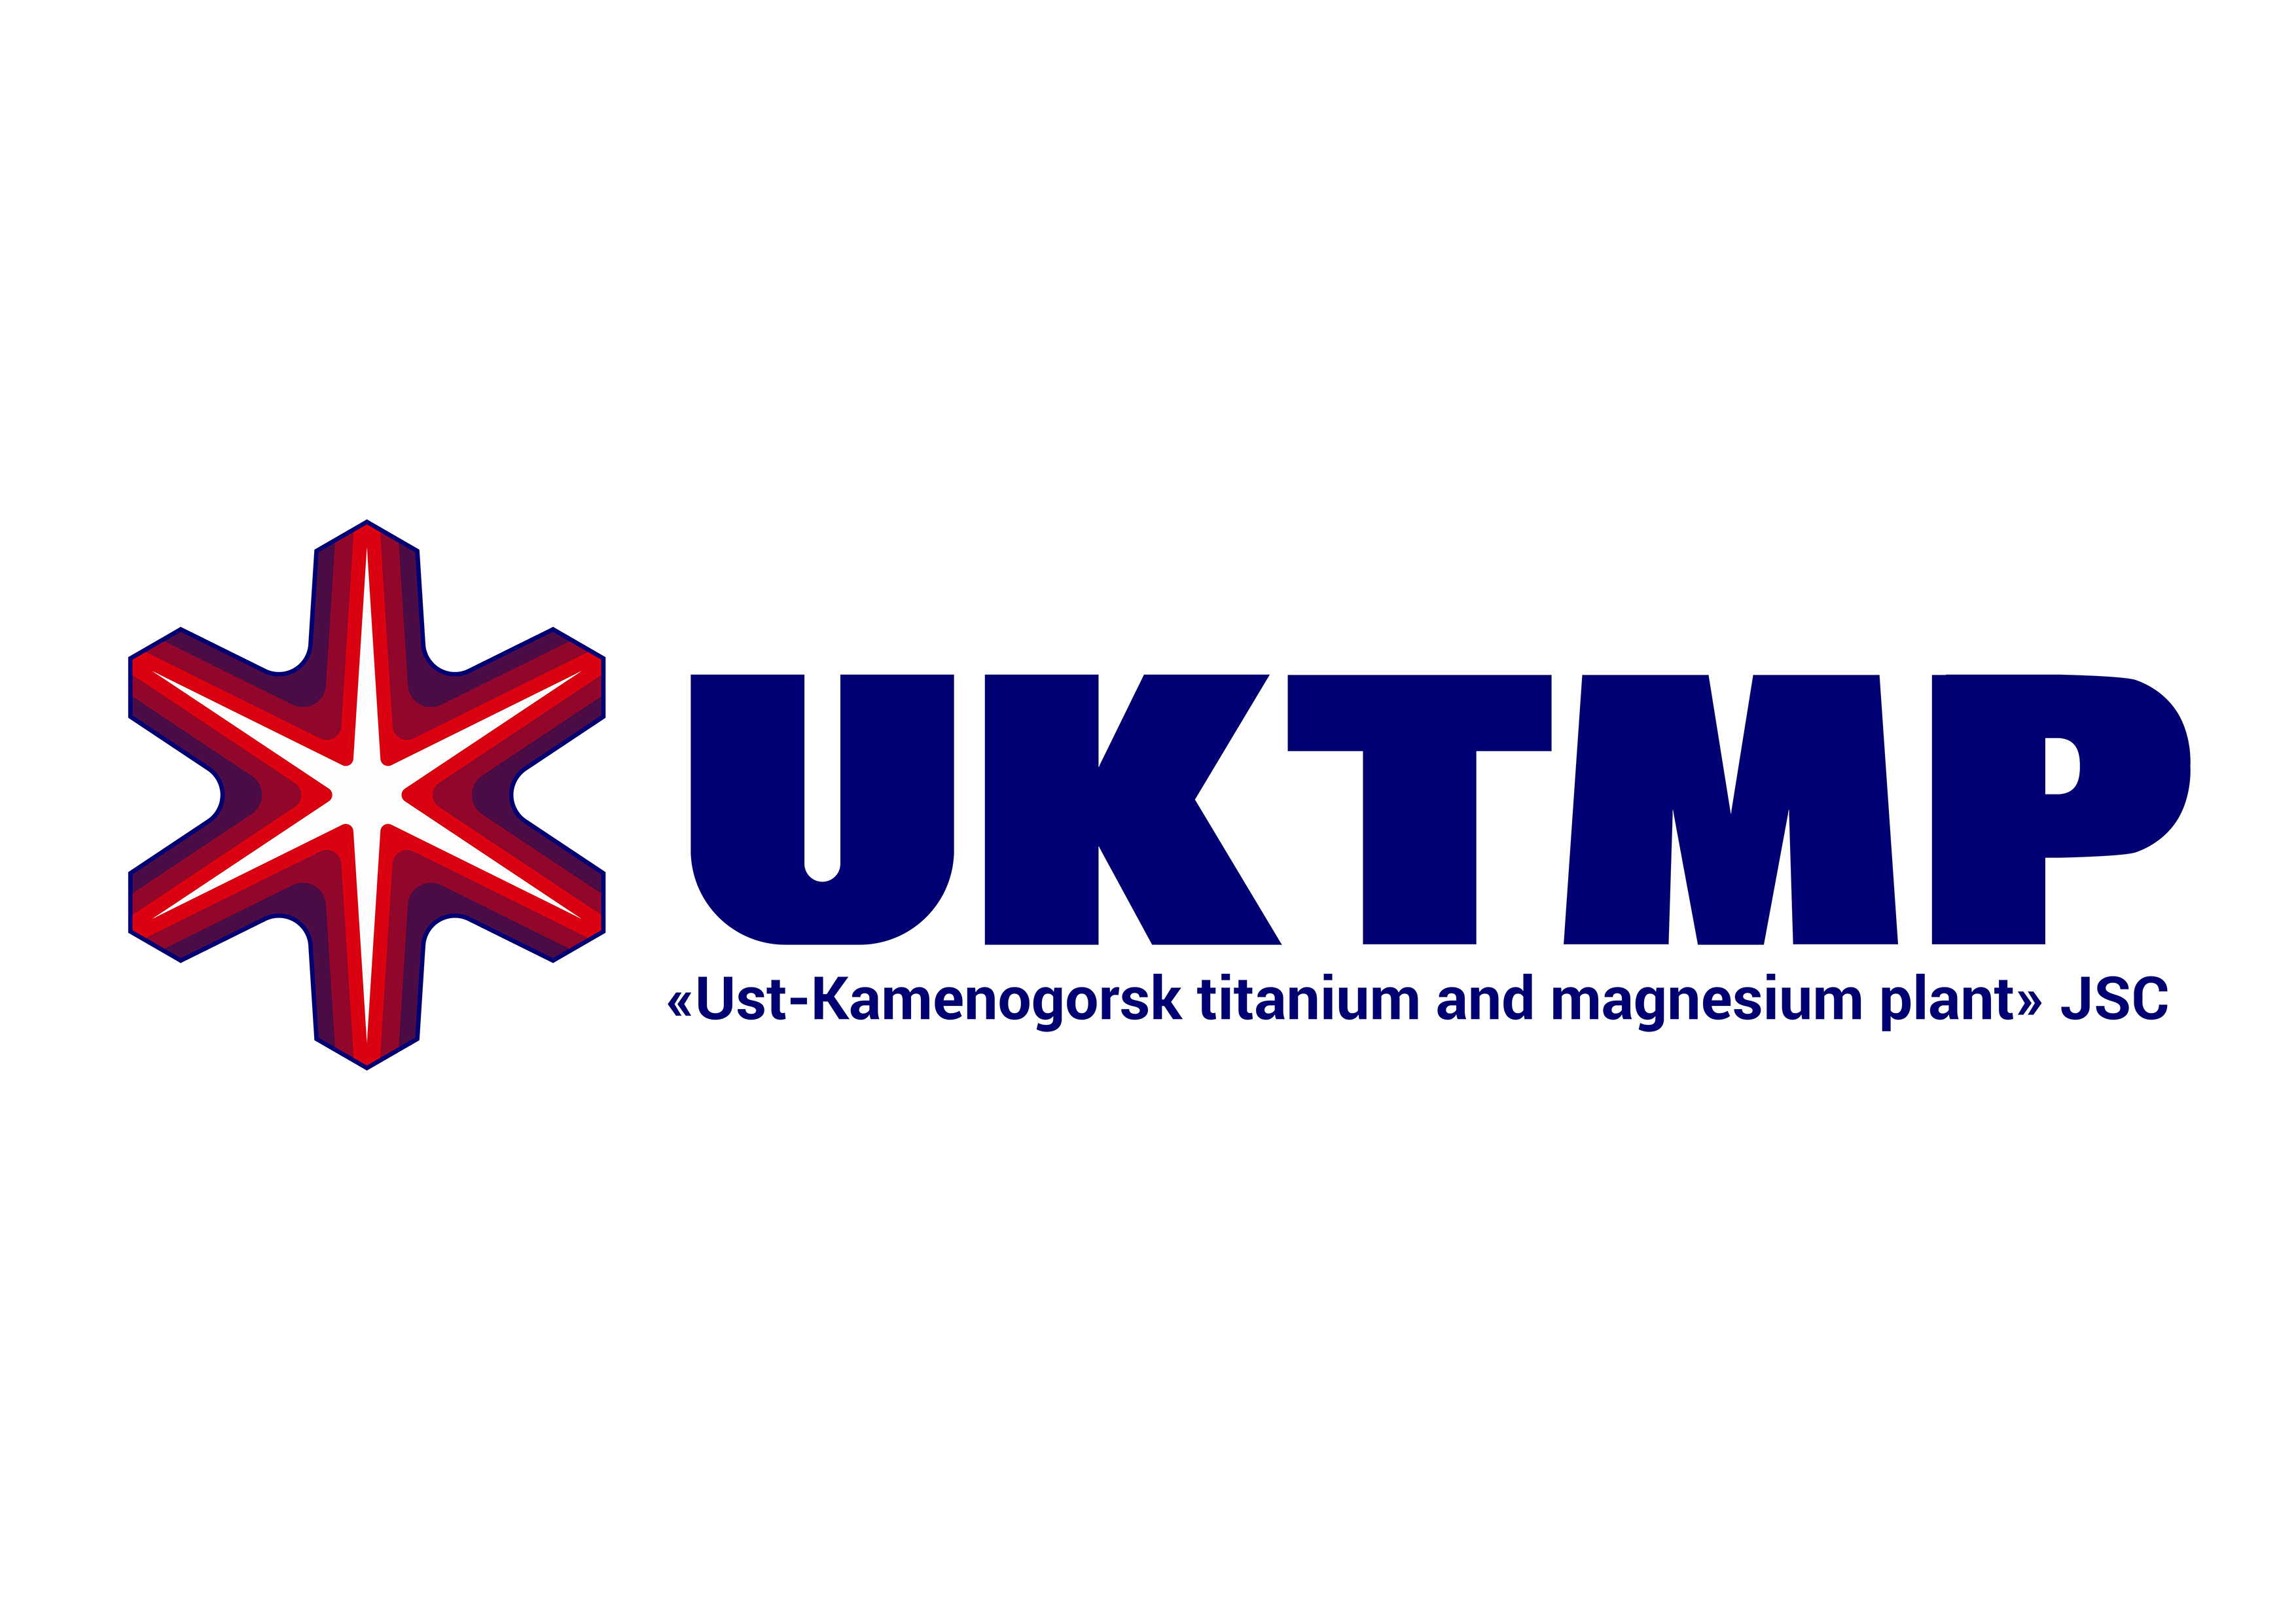 UKTMP JSC was awarded platinum and silver prizes  in the annual SAP Value Award 2021